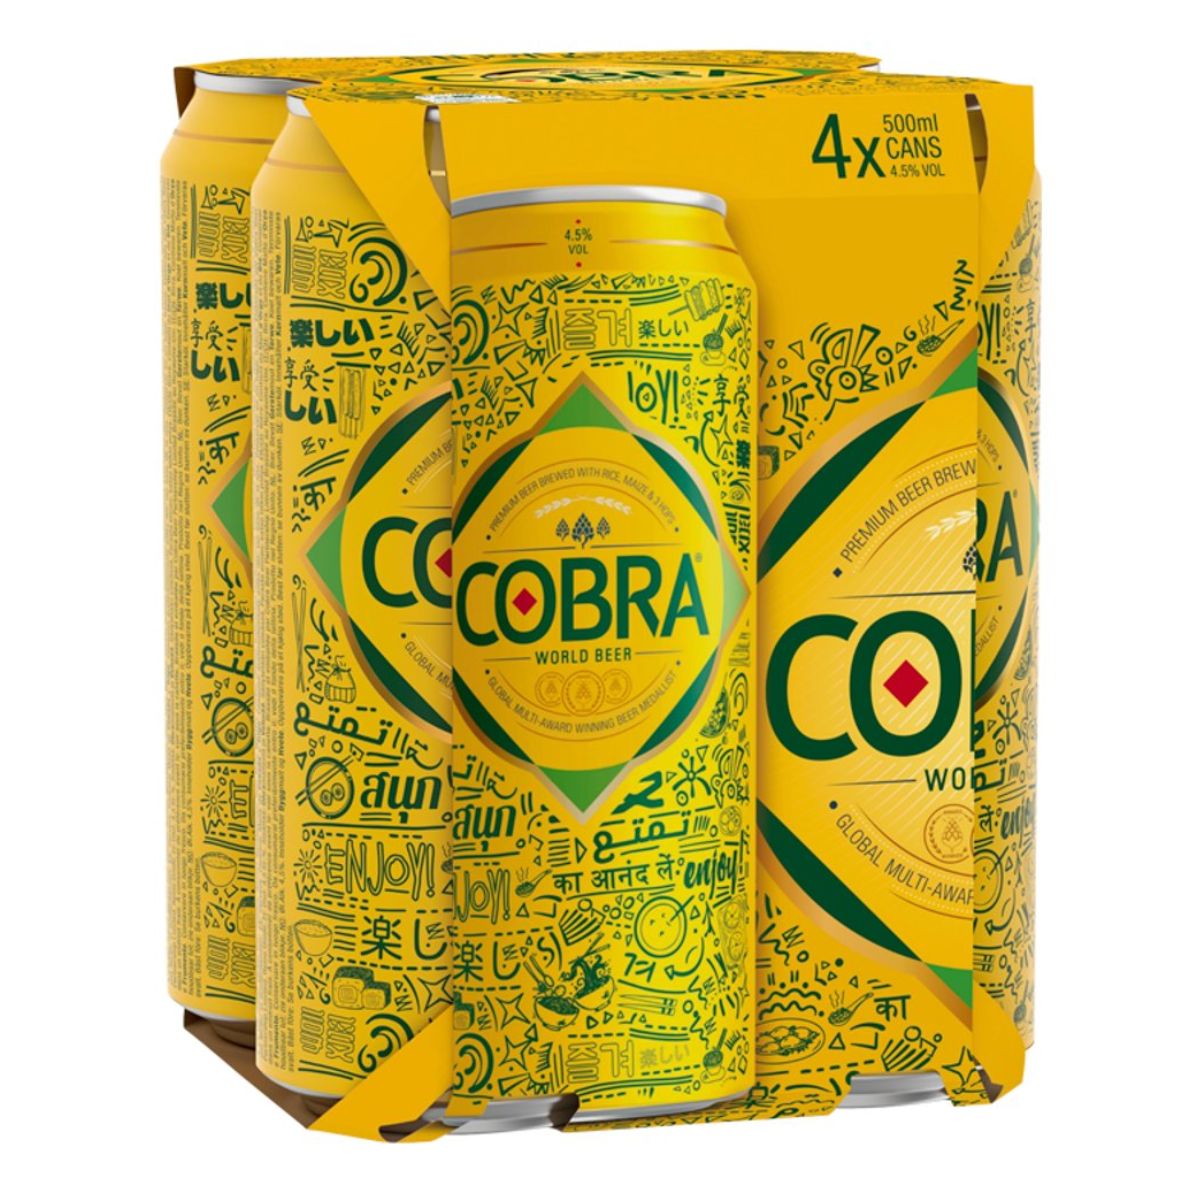 Four cans of Cobra - Premium Beer (4.5% ABV) - 4 x 500ml on a white background.